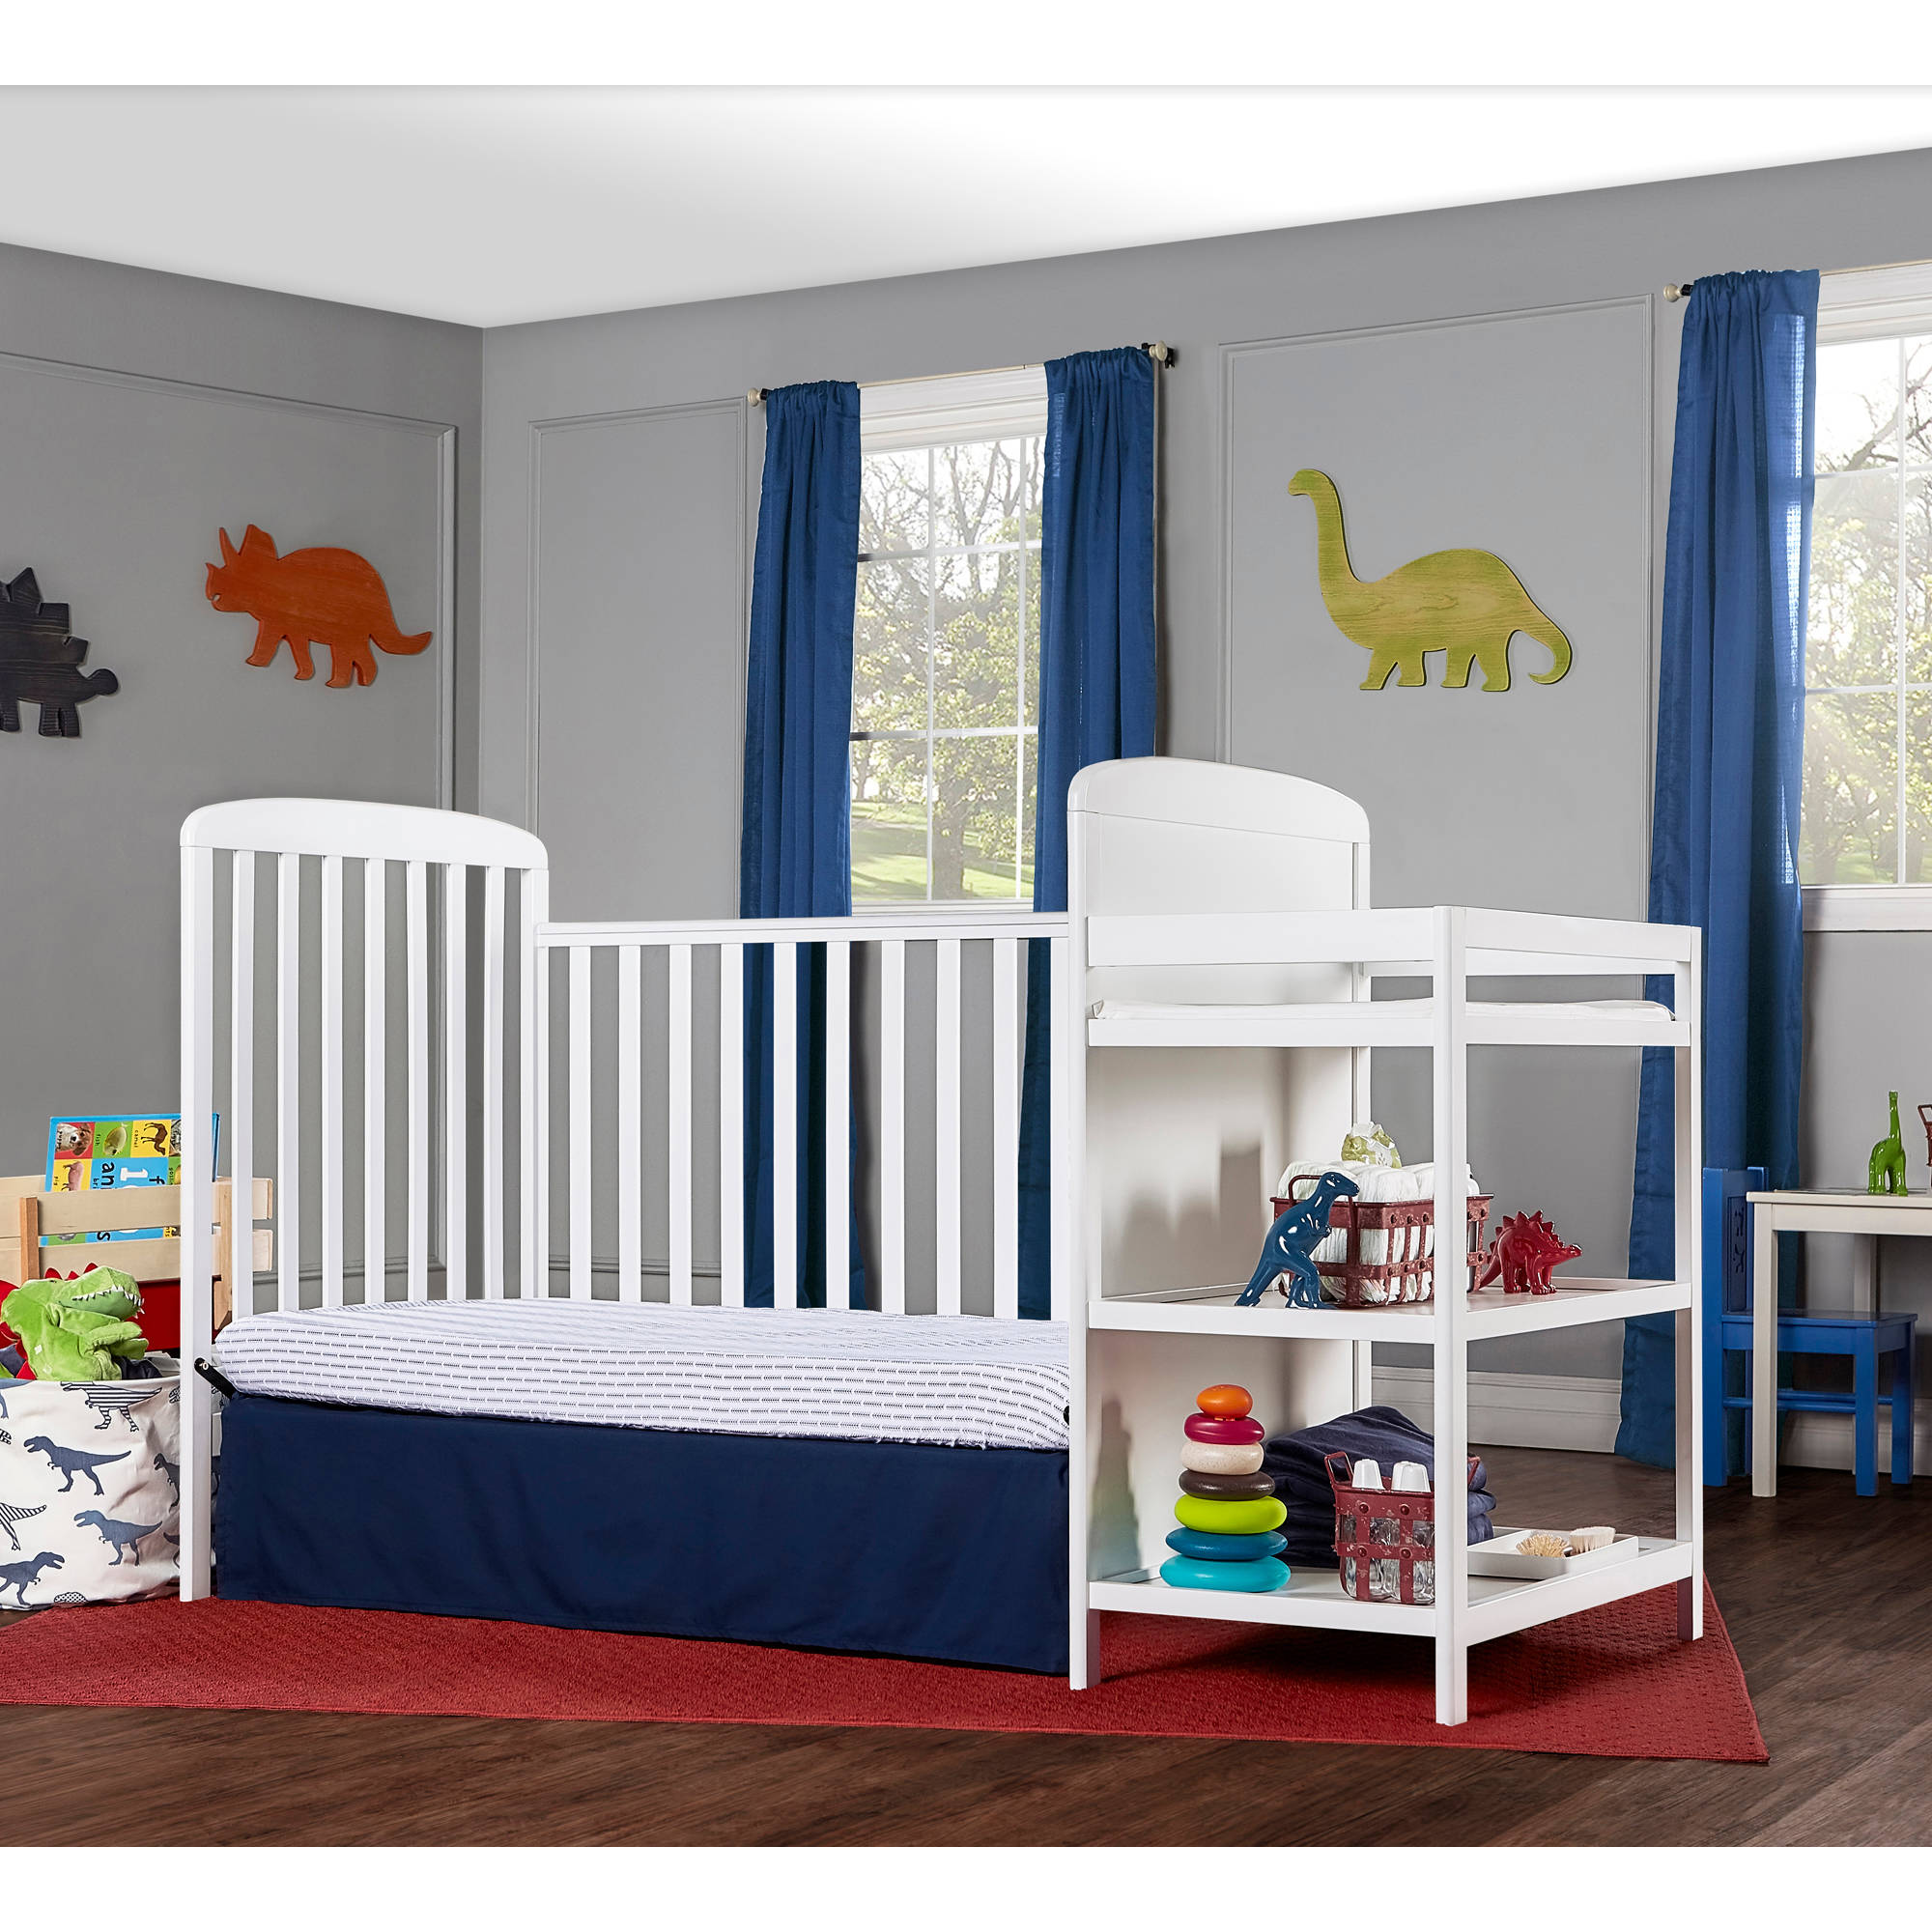 Dream On Me Anna 4-in-1 Full Size Crib and Changing Table, White - image 4 of 10